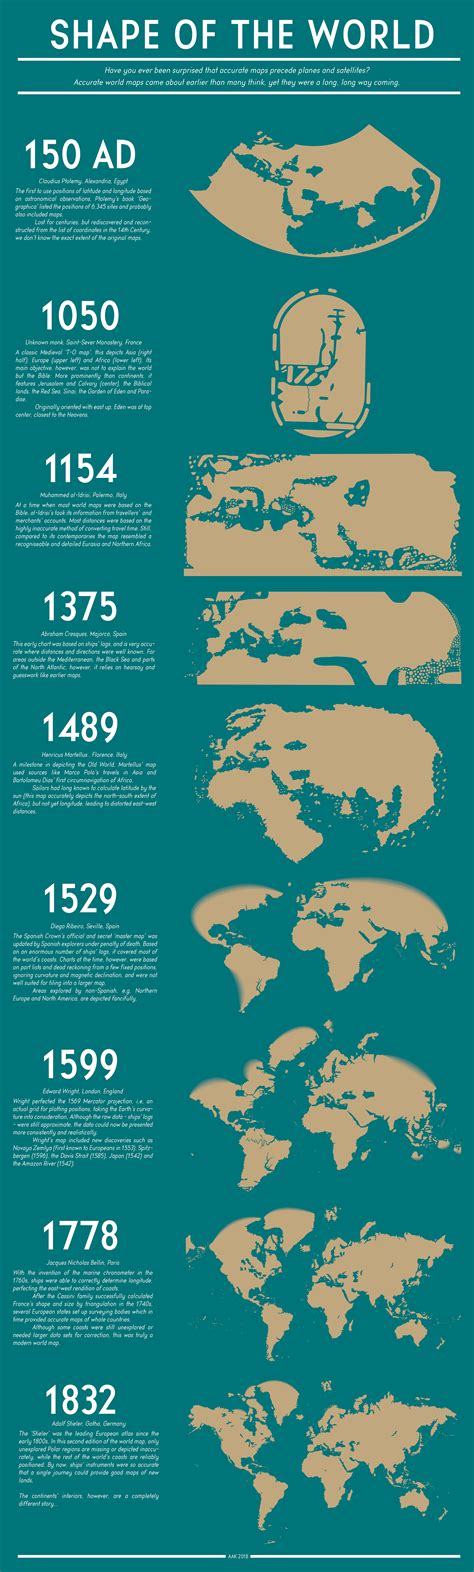 The Evolution Of The World Map An Inventive Infographic Shows How Our